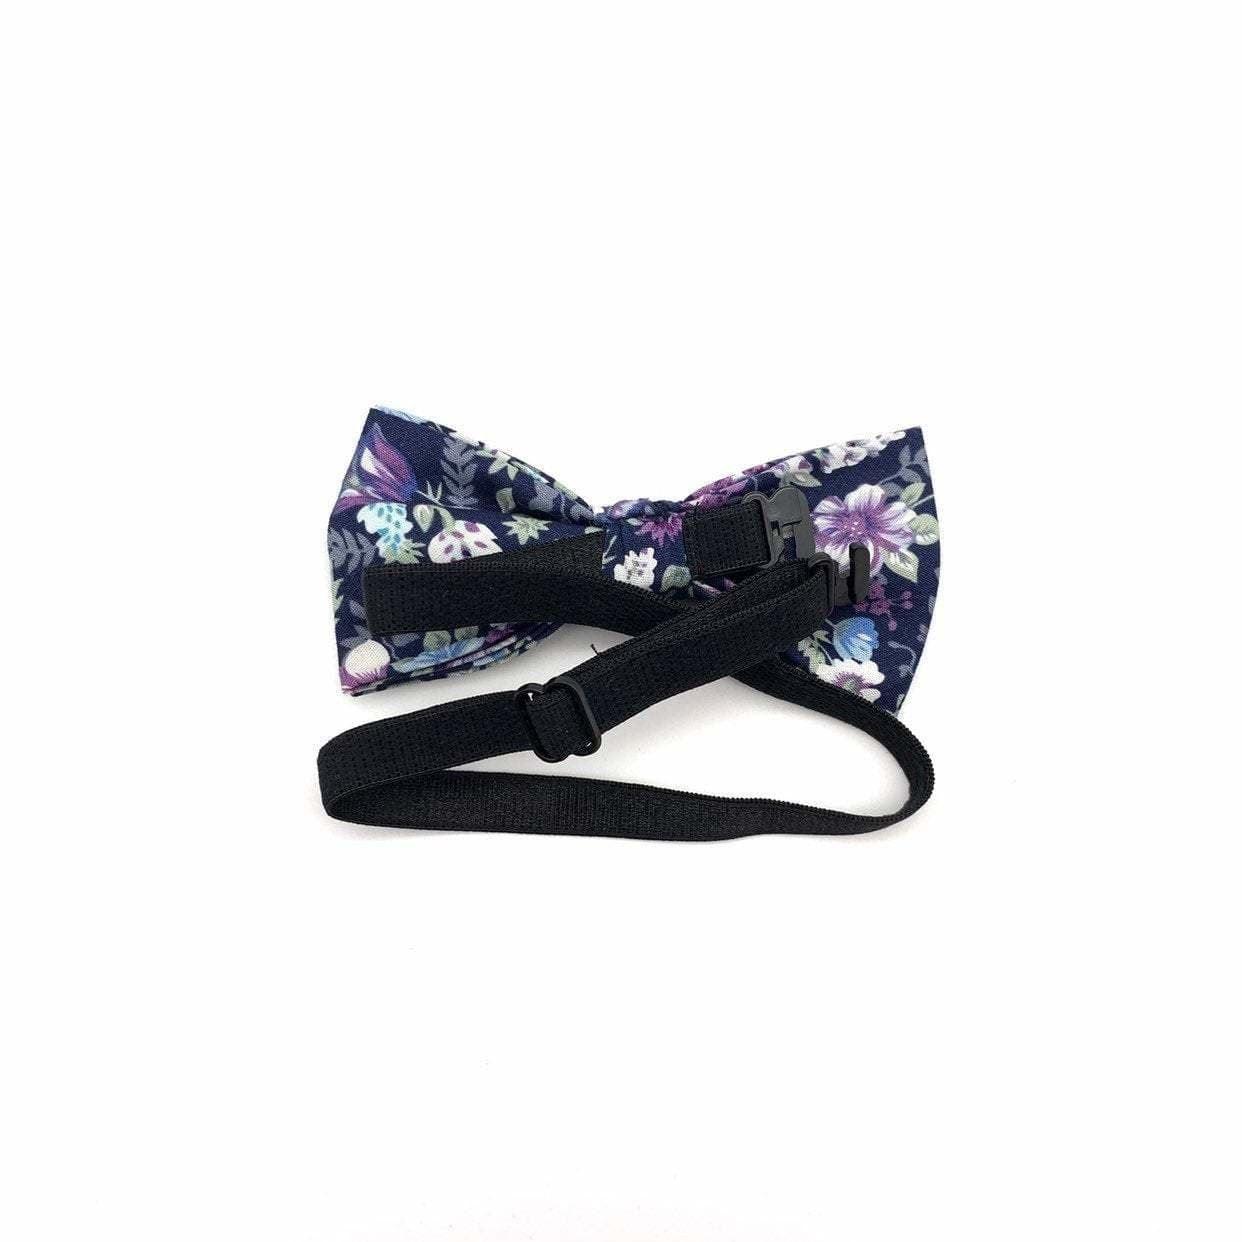 Purple and Blue Kids Floral Pre-Tied Bow Tie Mytieshop - SWEET PEA-Kids&#39; Floral Bow tie SWEET PEA Color: Blue Base Strap is adjustablePre-Tied bowtieBow Tie 10.5 * 6CM Great for Prom Dinners Interviews Photo shoots Photo sessions Dates Wedding Attendant Ring Bearers Fits toddlers and babies. Evabder baby ow tie toddler bow tie floral for wedding and events groom groomsmen flower bow tie mytieshop ring bearer page boy bow tie white bow tie white and blue tie kids bowtie floral Adjustable wedding 